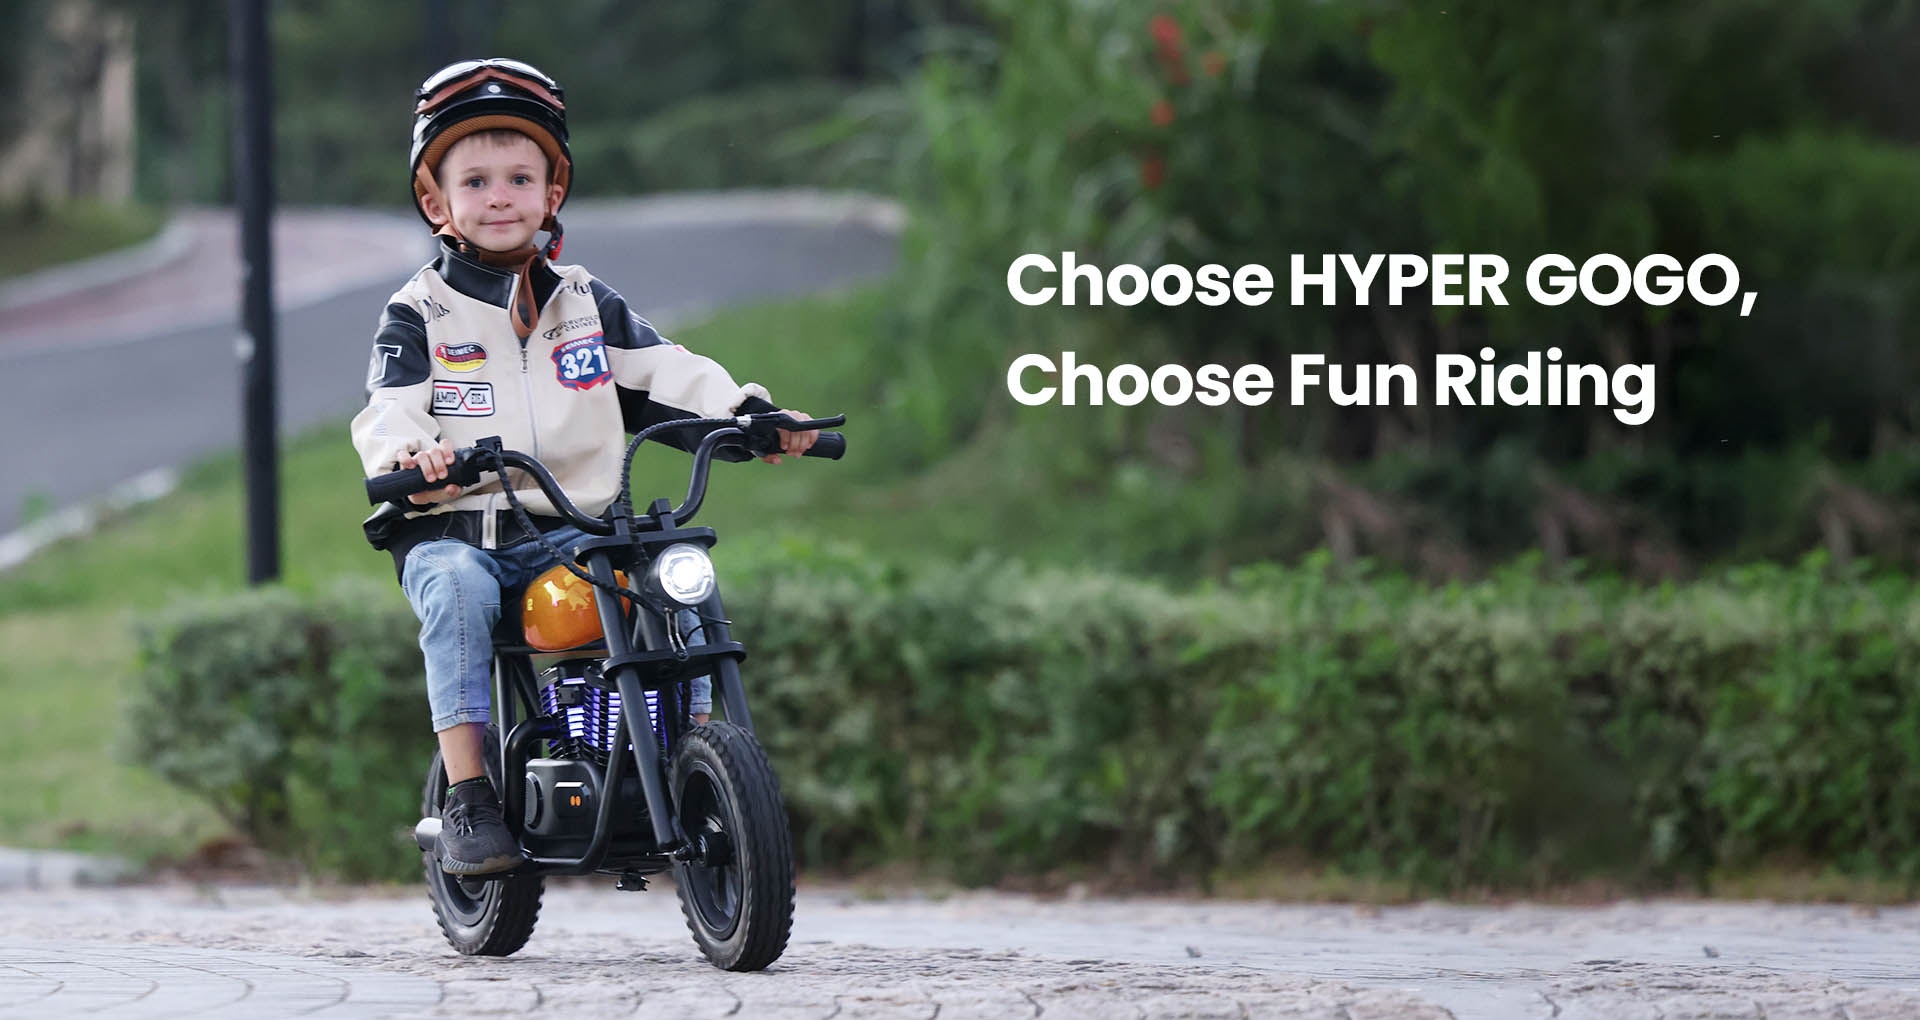 HYPER GOGO Pioneer 12 Plus Electric Chopper Motorcycle for Kids 24V 5.2Ah 160W with 12'x3' Tires, 12KM Top Range - Black